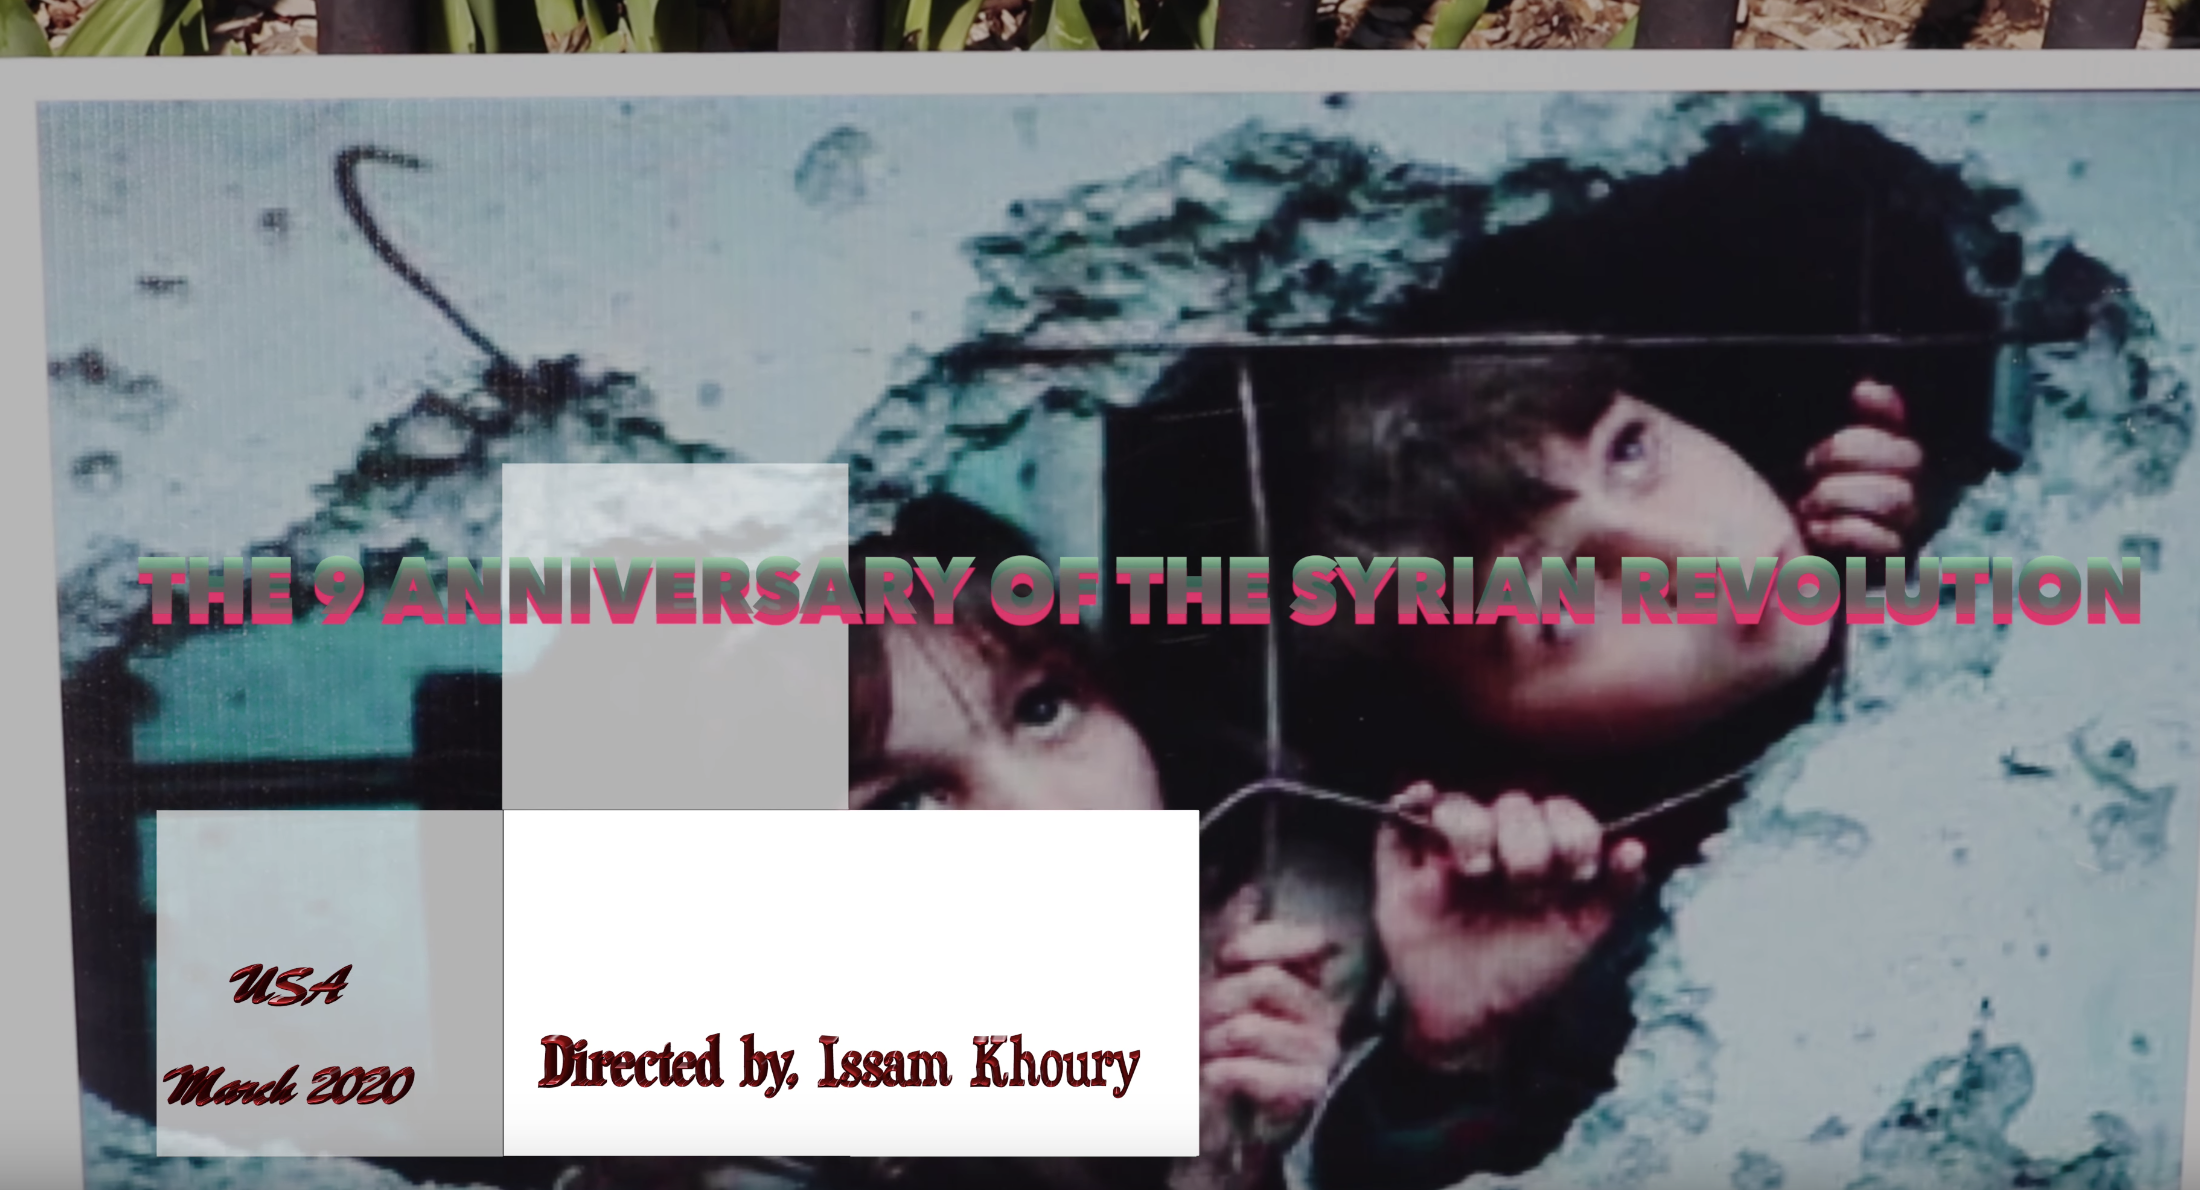 The 9 anniversary of the Syrian revolution